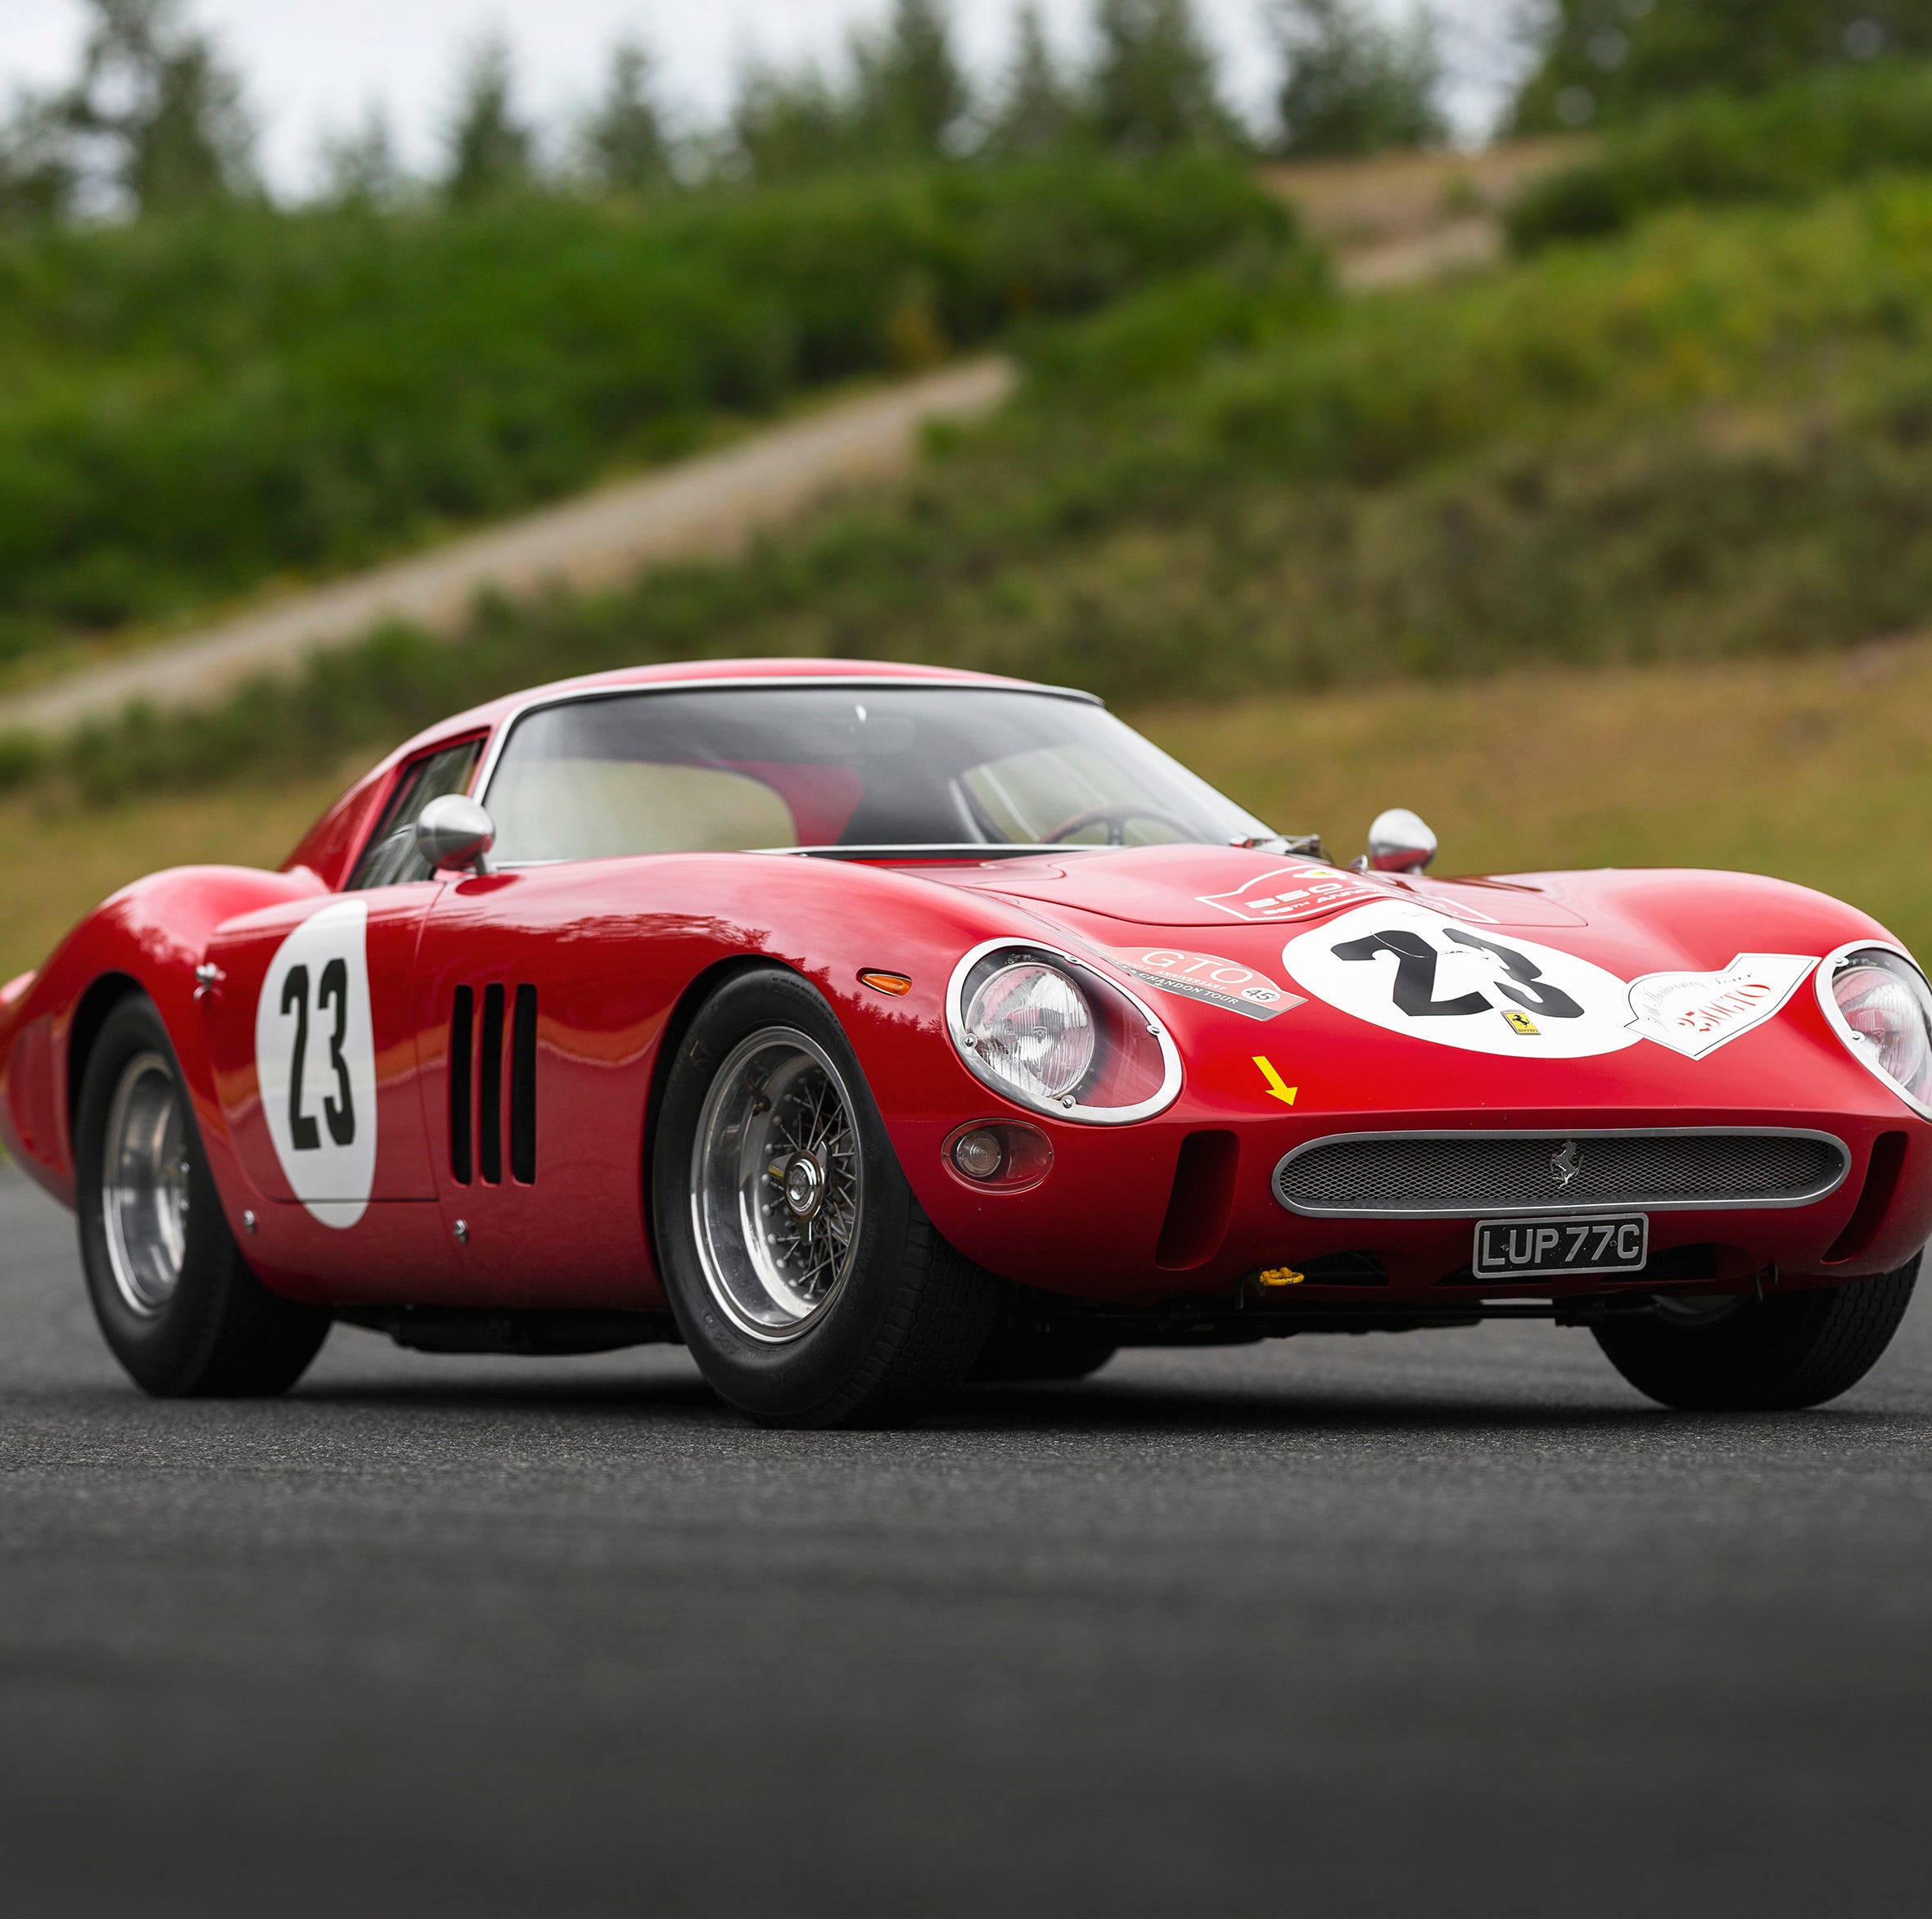 This Ferrari GTO, built in 1962, was a winner on the track and with collectors: it will be up for sale for an estimated $45 to $60 million.